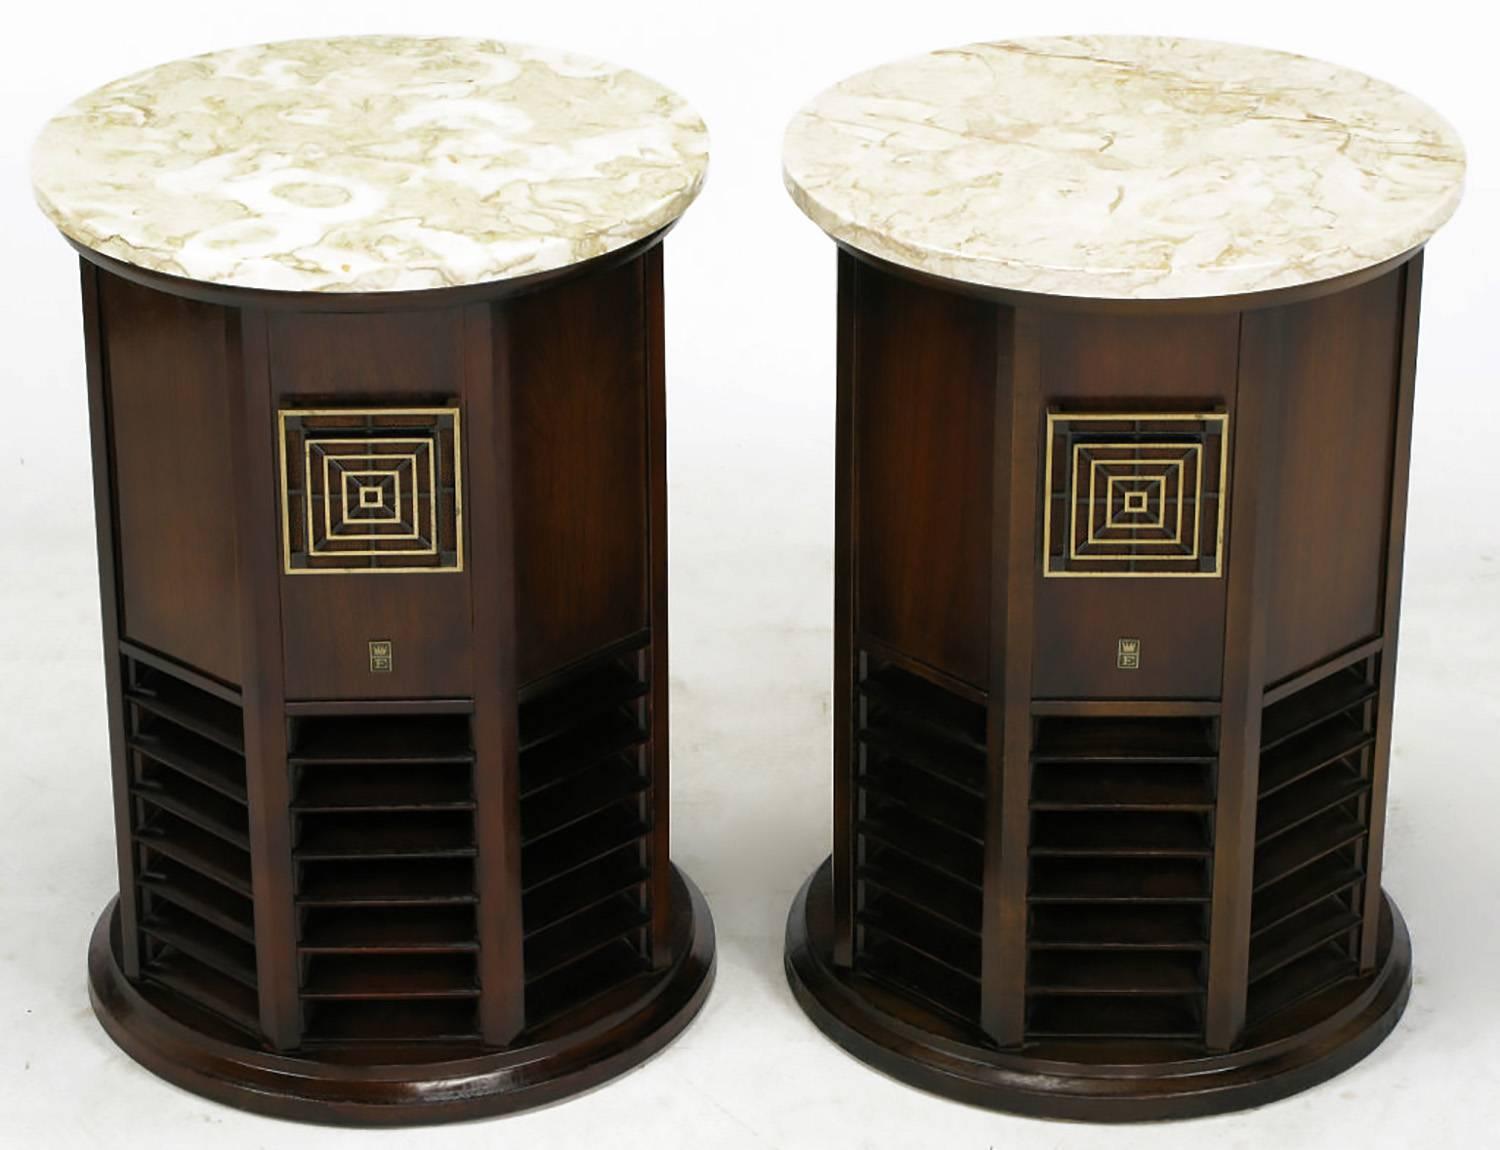 Pair of walnut and marble octagonal end tables with enclosed speakers by Long Island NY high end audio manufacturer Empire. Functional as speakers as well as end tables or pedestals. Could also be retrofitted with subwoofers for a compact home